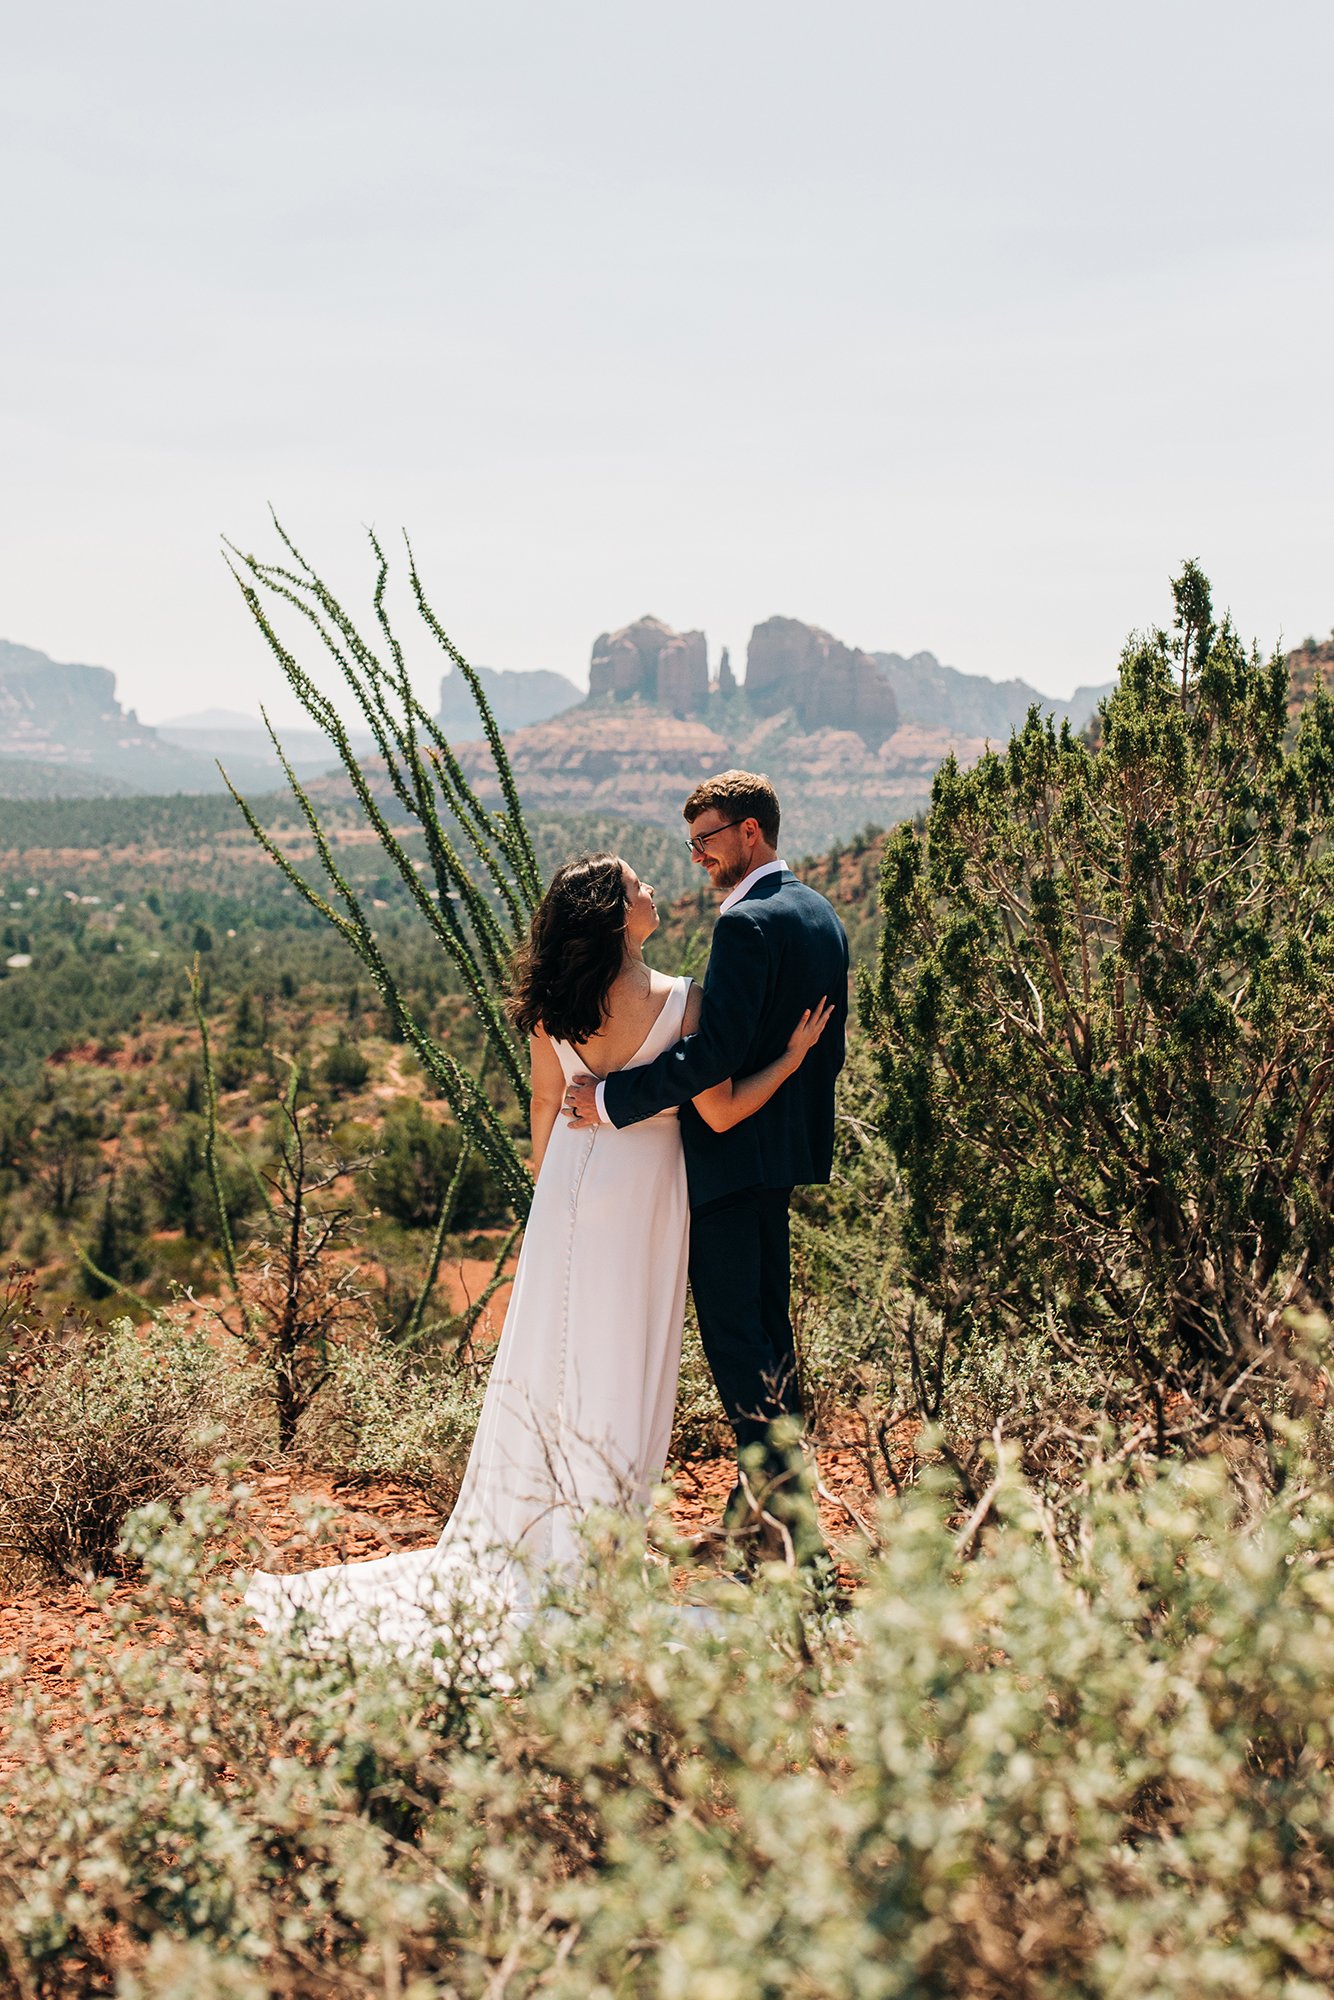 With amazing cliffs and dazzling plants in the background, Matt and Steph pose in their wedding attire for elopement photographer in Sedona